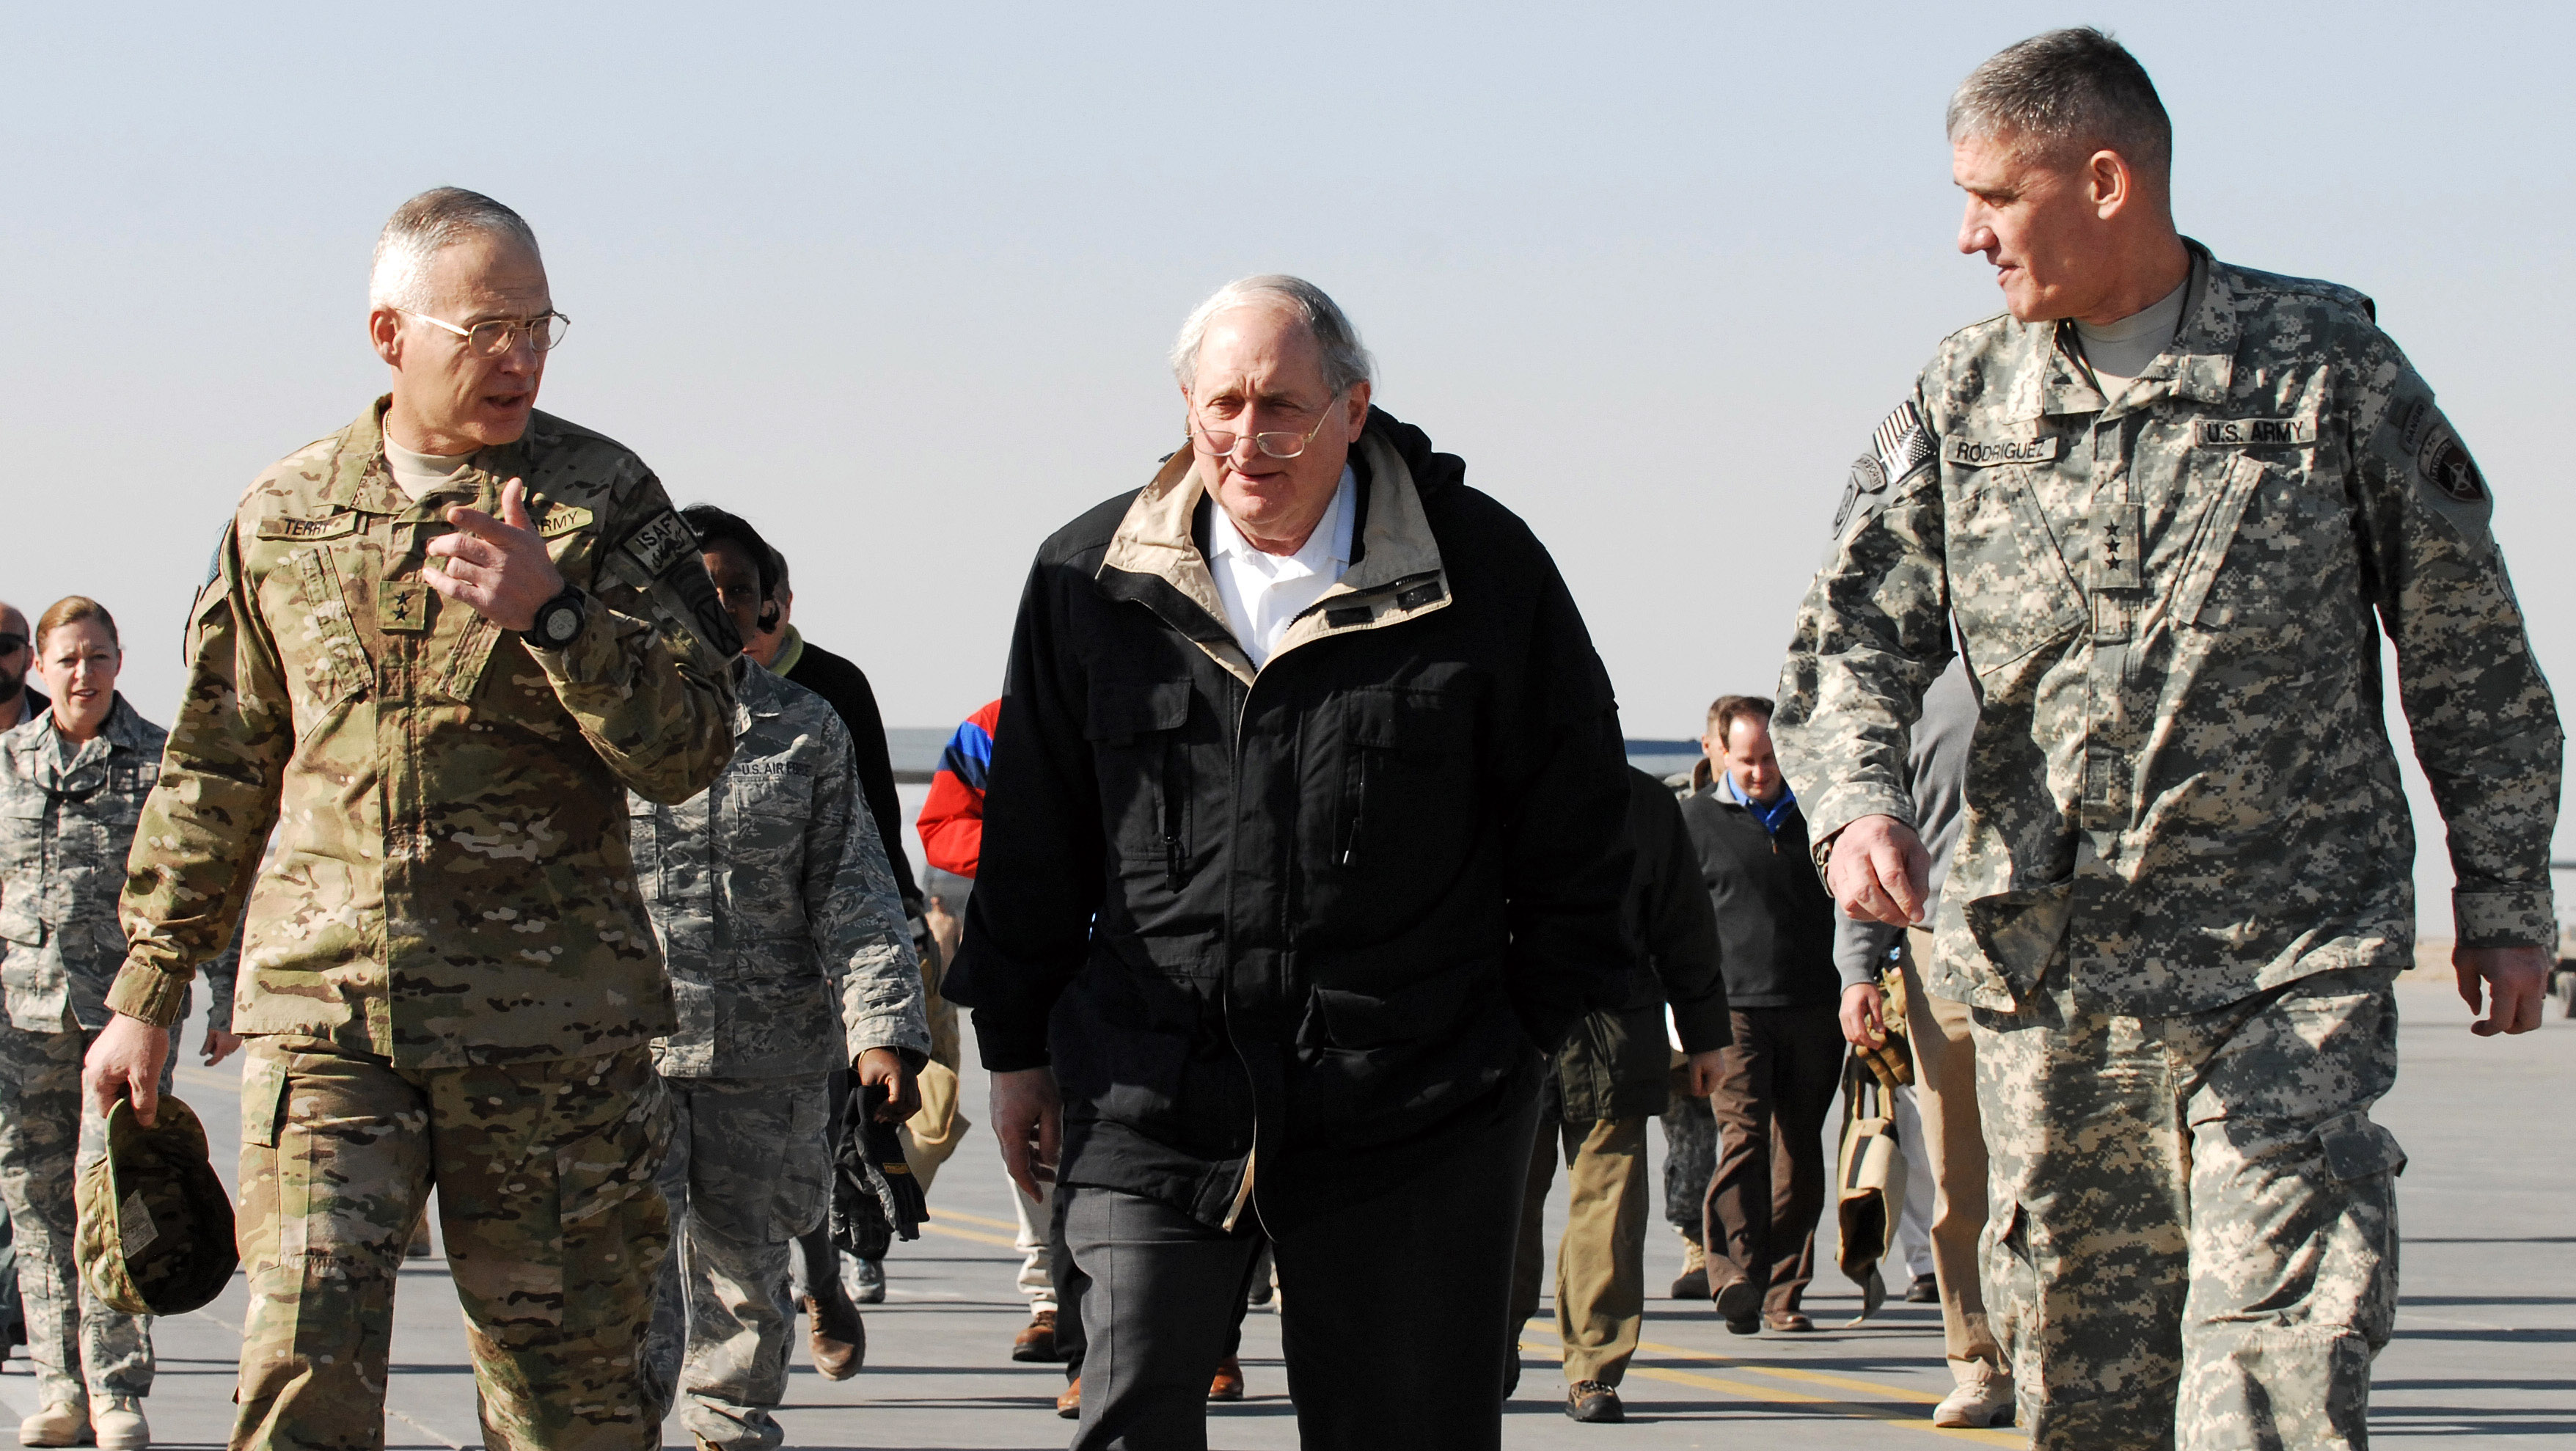 Carl Levin, center, on a 2011 visit to Afghanistan. (U.S. Navy / Getty Images)